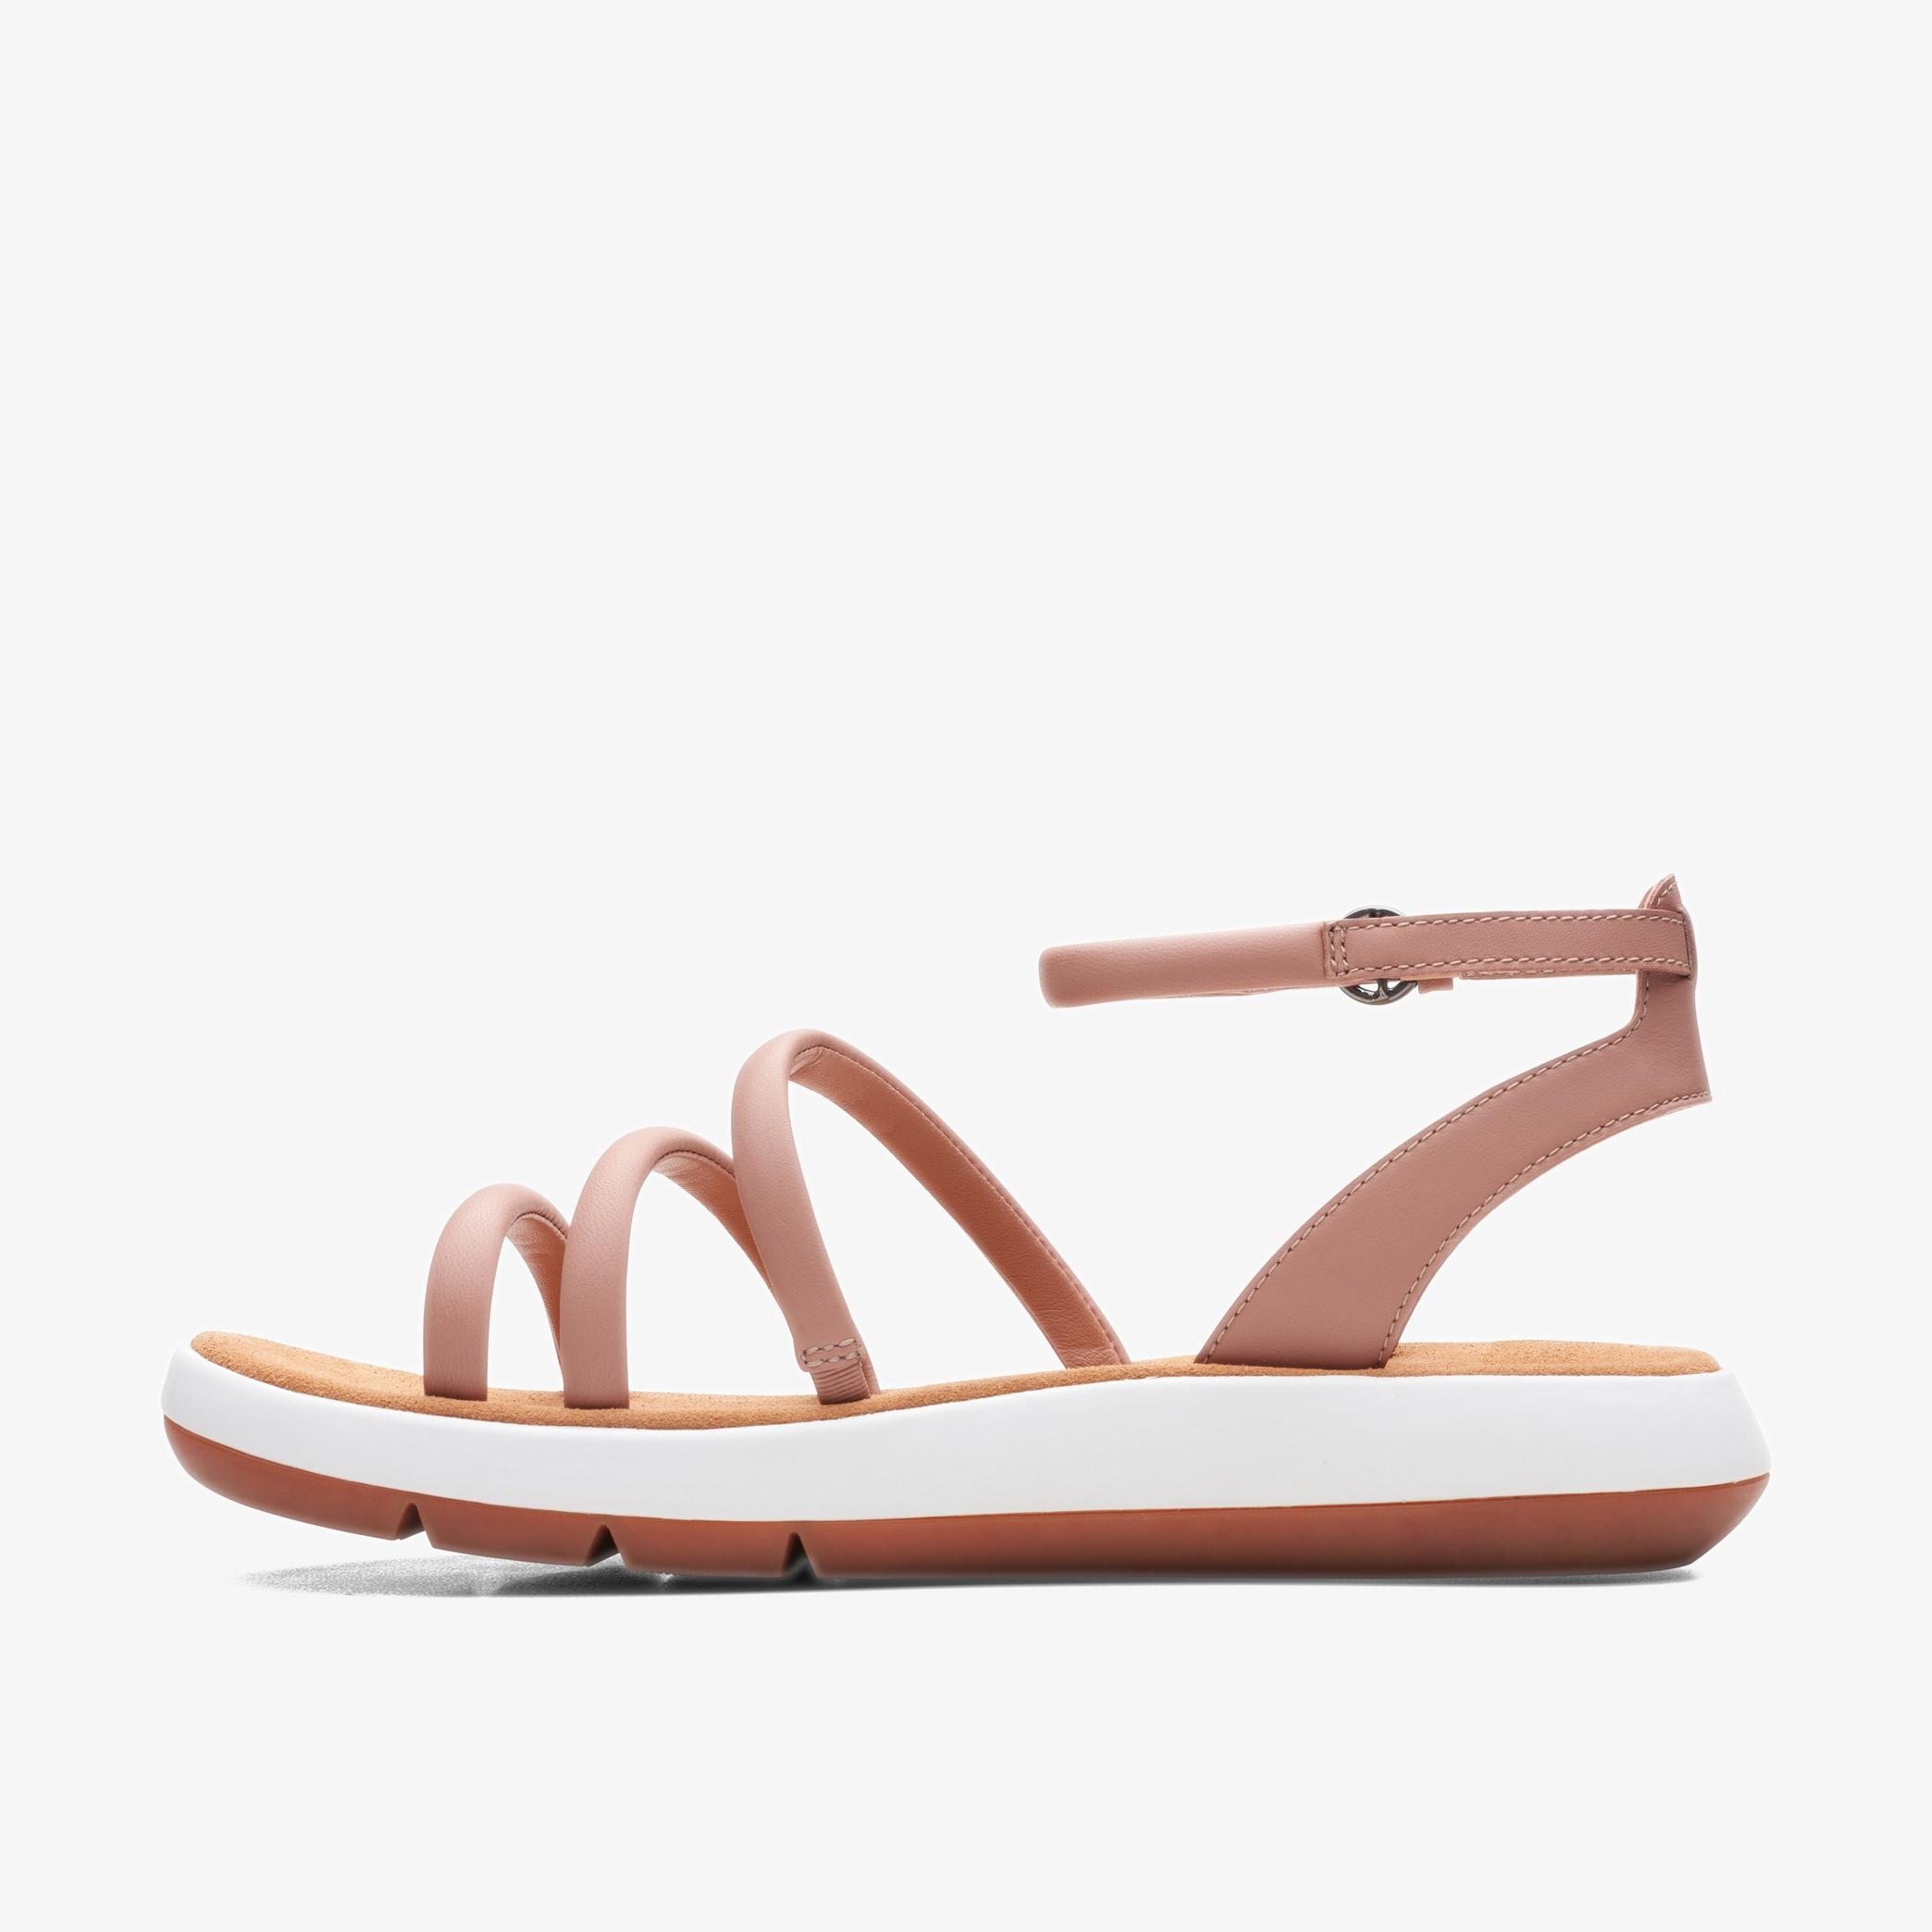 Jemsa Style Rose Leather Flat Sandals, view 2 of 6